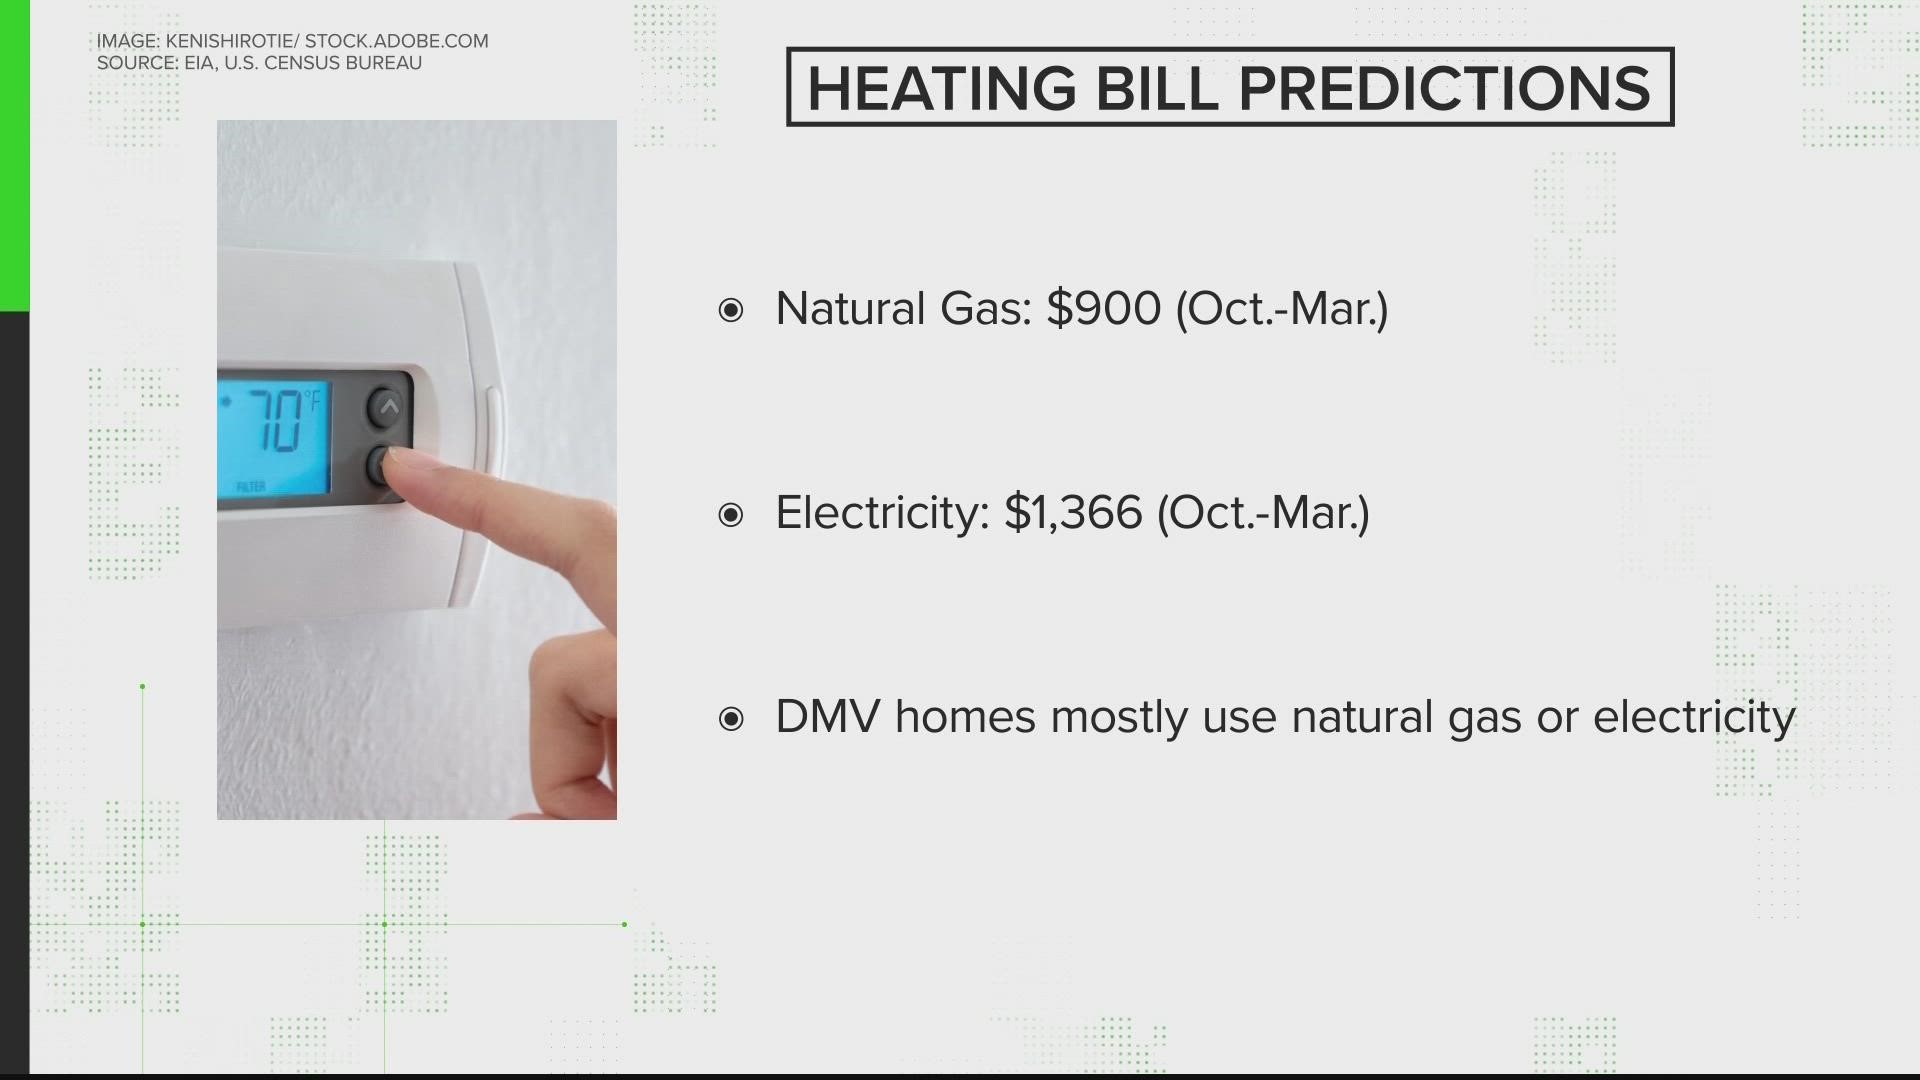 The Energy Information Administration is predicting the average U.S. household will spend $900 on natural gas or $1,366 on electricity between Oct. 2022-March 2023.